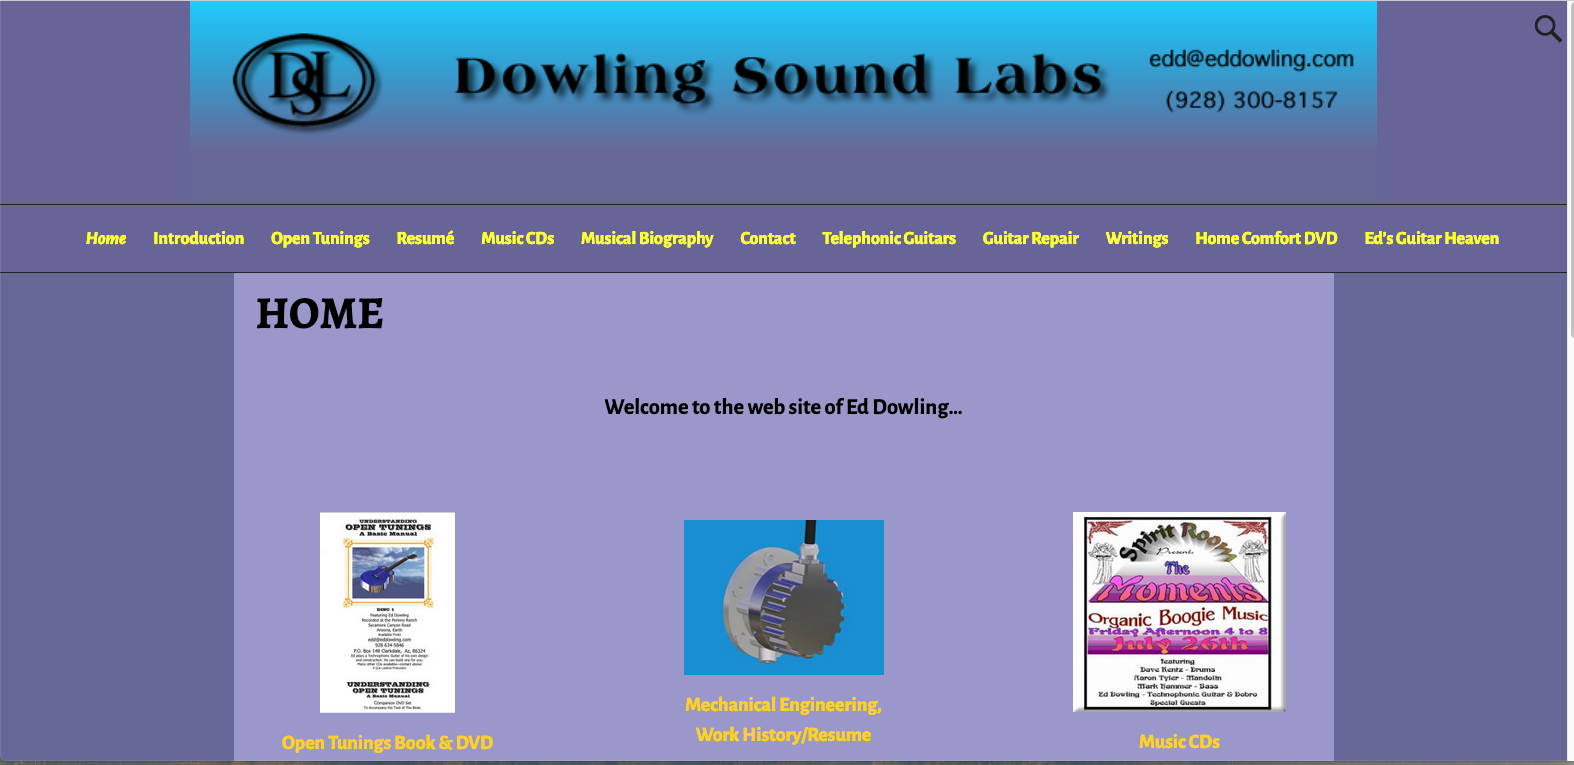 Dowling Sound Labs